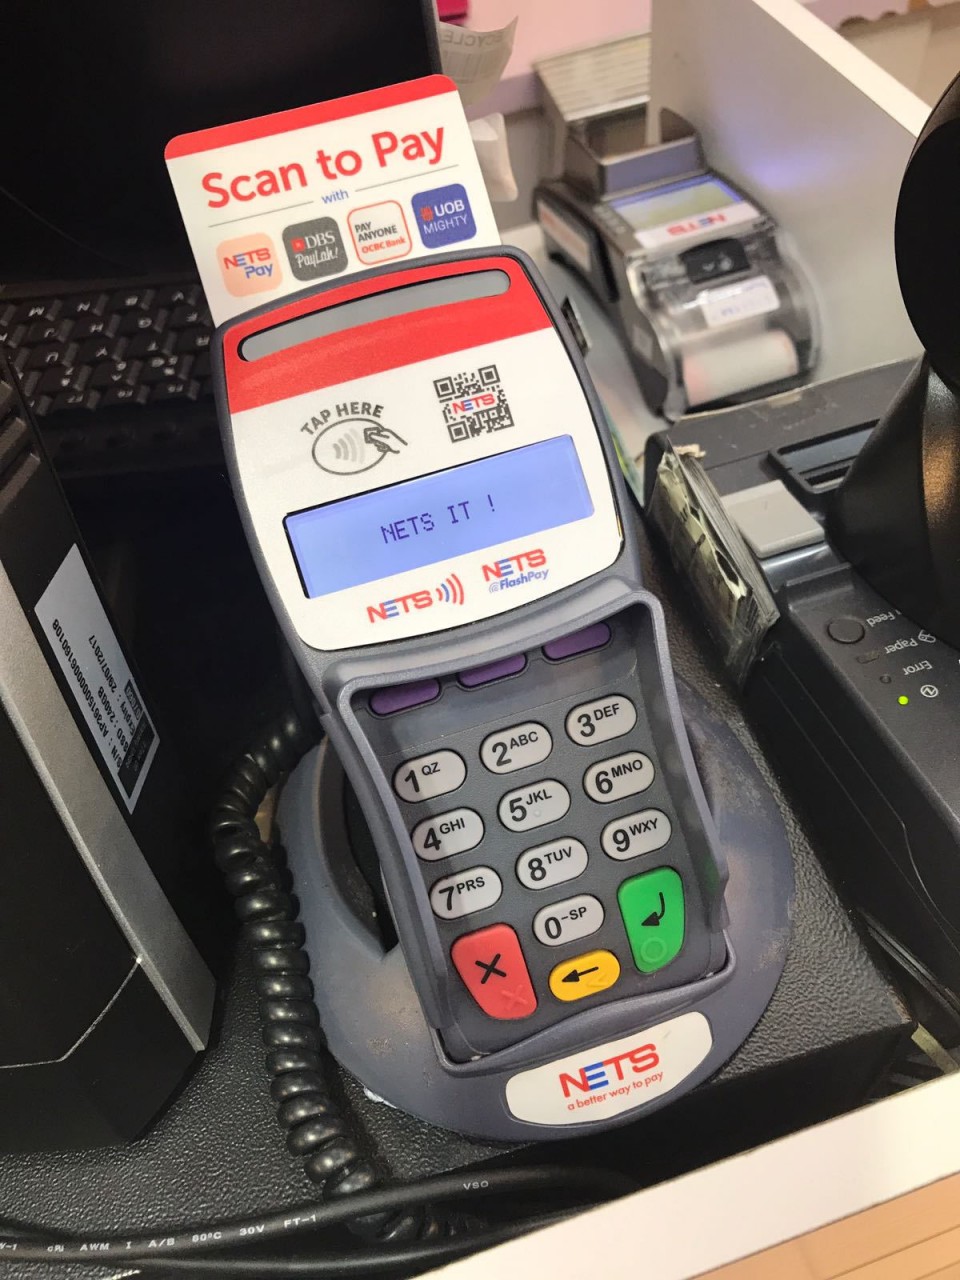 Just look out for the “Scan to Pay” NETSPay merchant sign above!